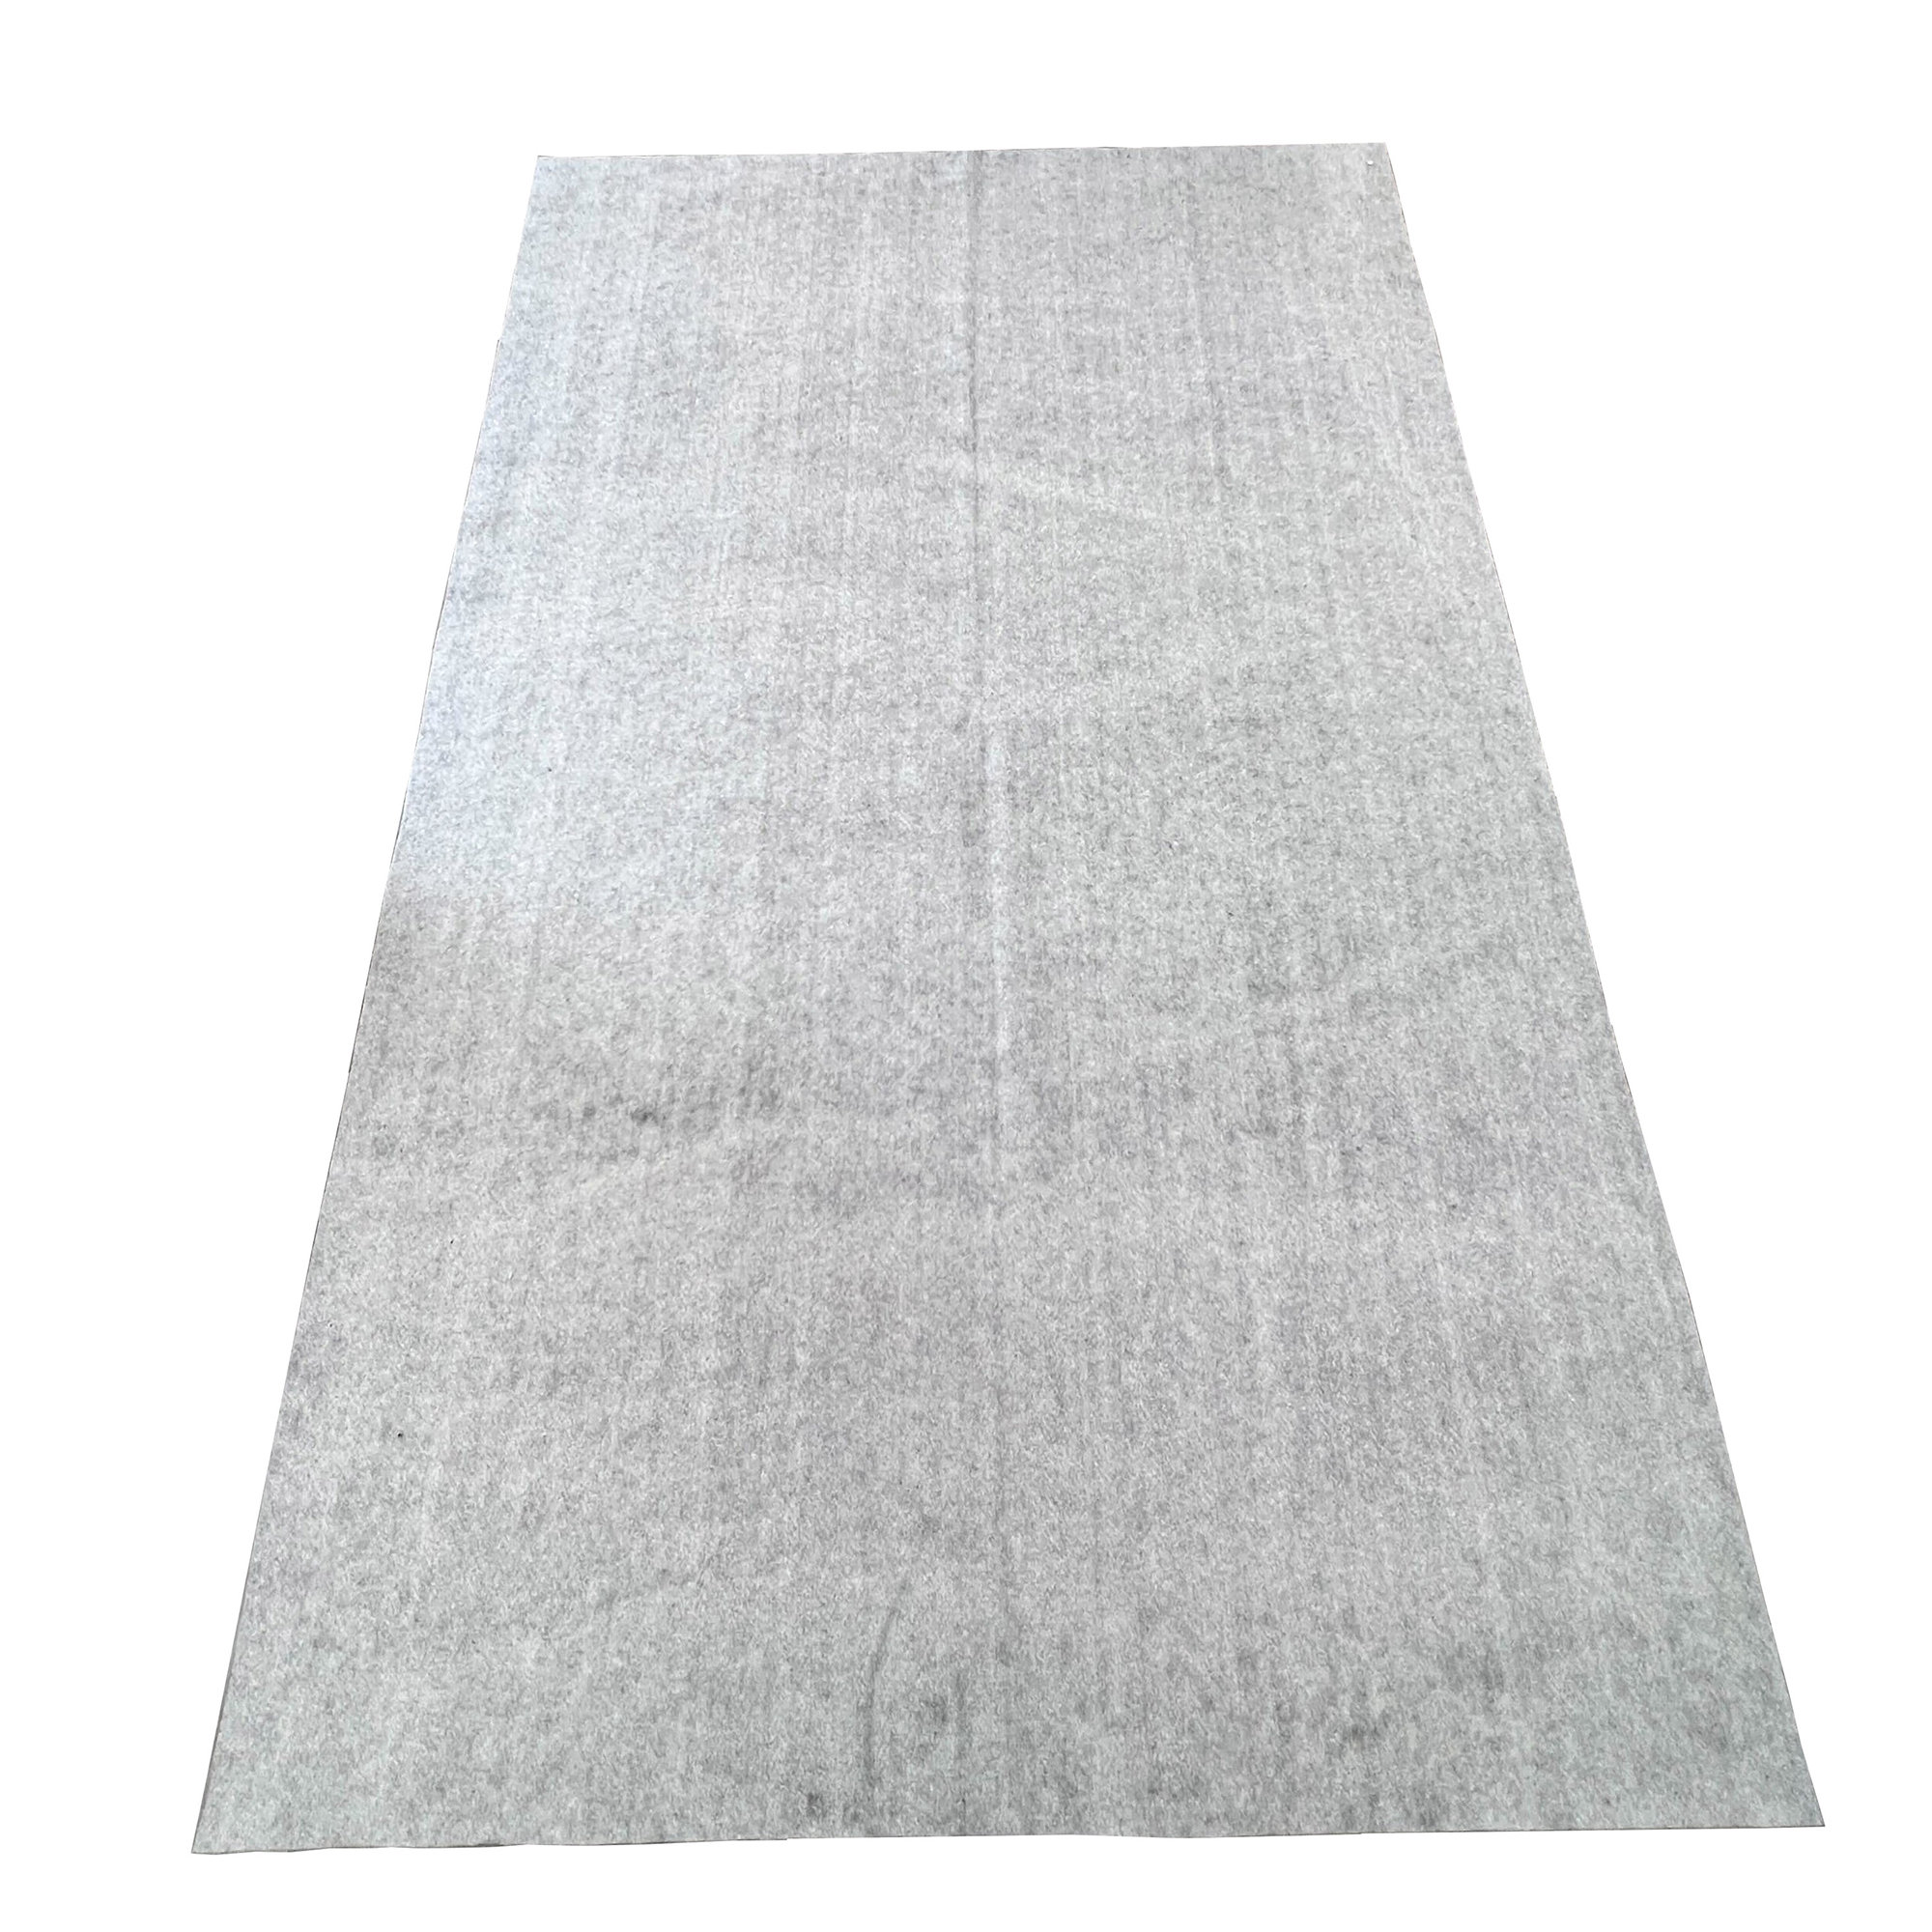 RugPadUSA - Basics - 10'x13' - 1/4 Thick - Felt + Rubber - Non-Slip Rug Pad - Cushioning Felt for Added Comfort - Safe for All Floors and Finishes